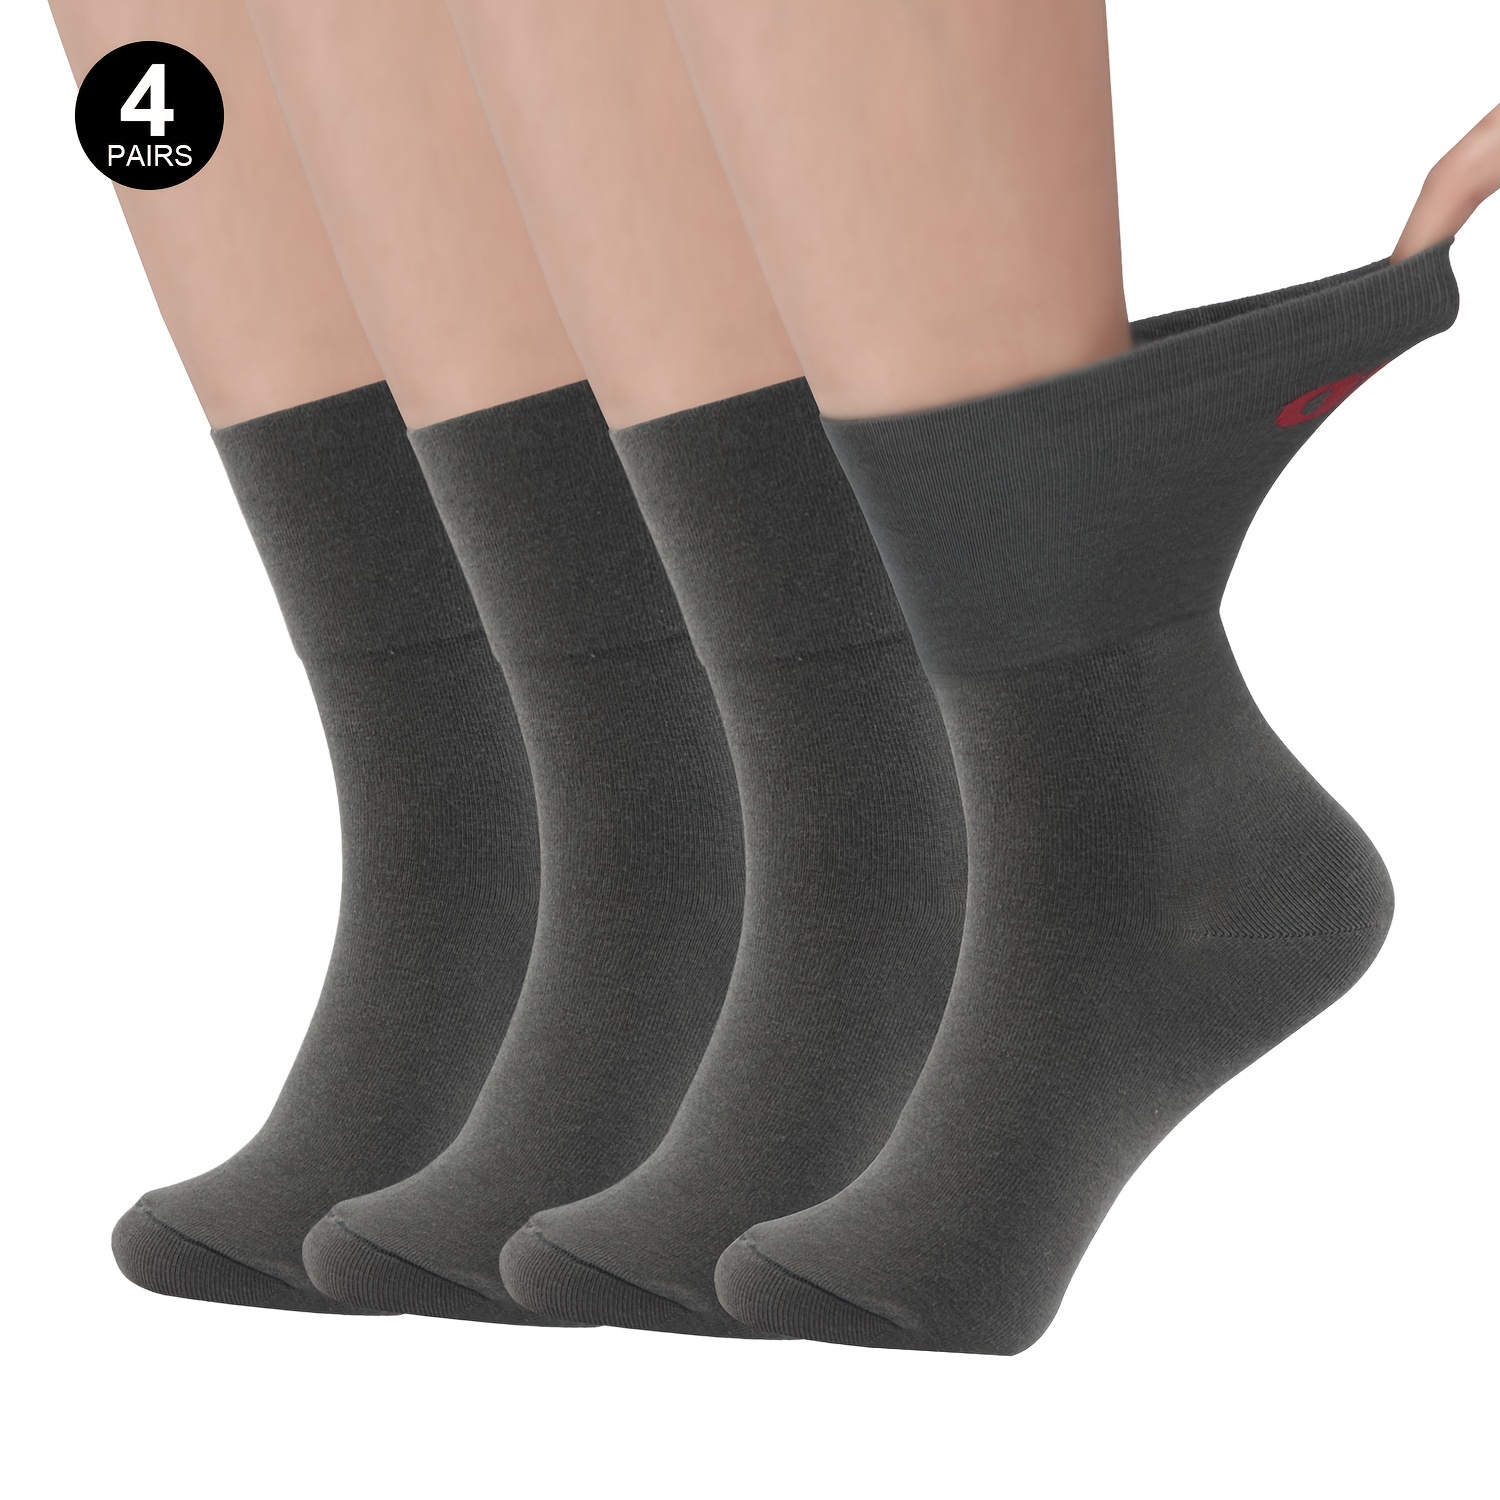 Loose Fitting Socks for Women Soft Crew Socks 3 Pairs Size 9-11 - S-2